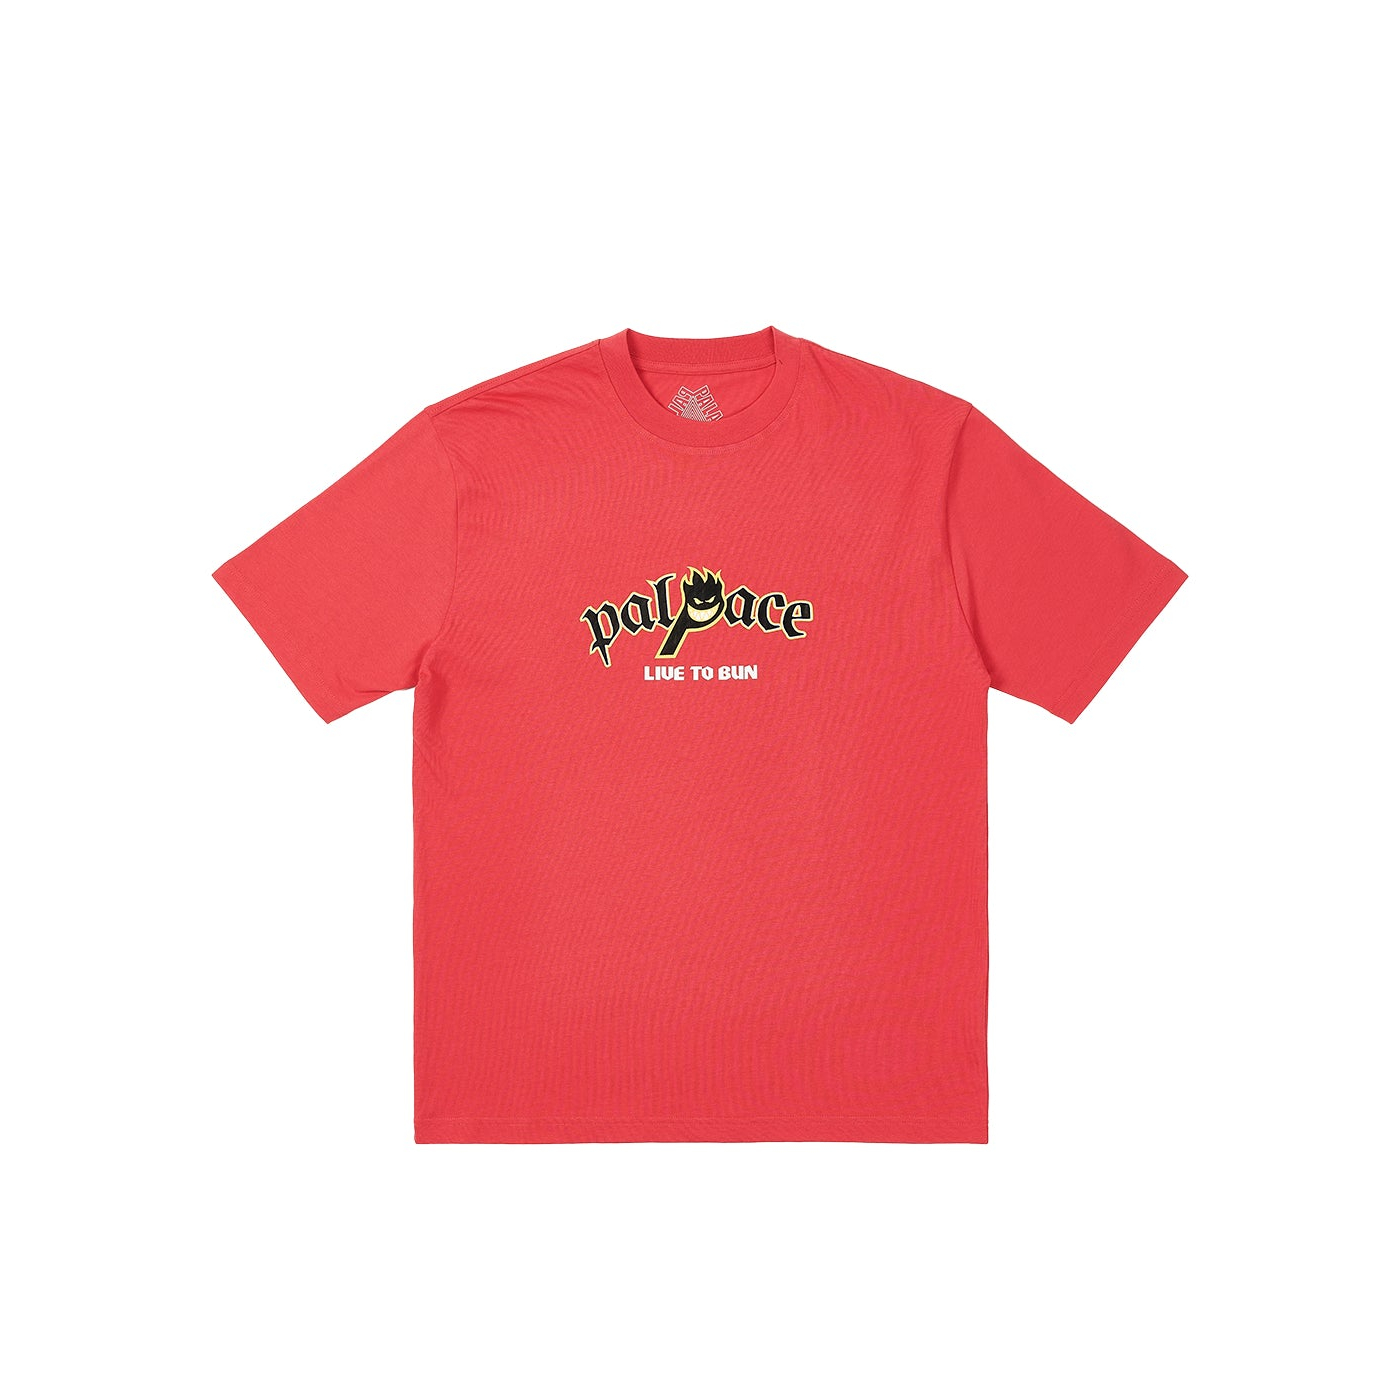 Thumbnail PALACE SPITFIRE P-HEAD T-SHIRT RED one color